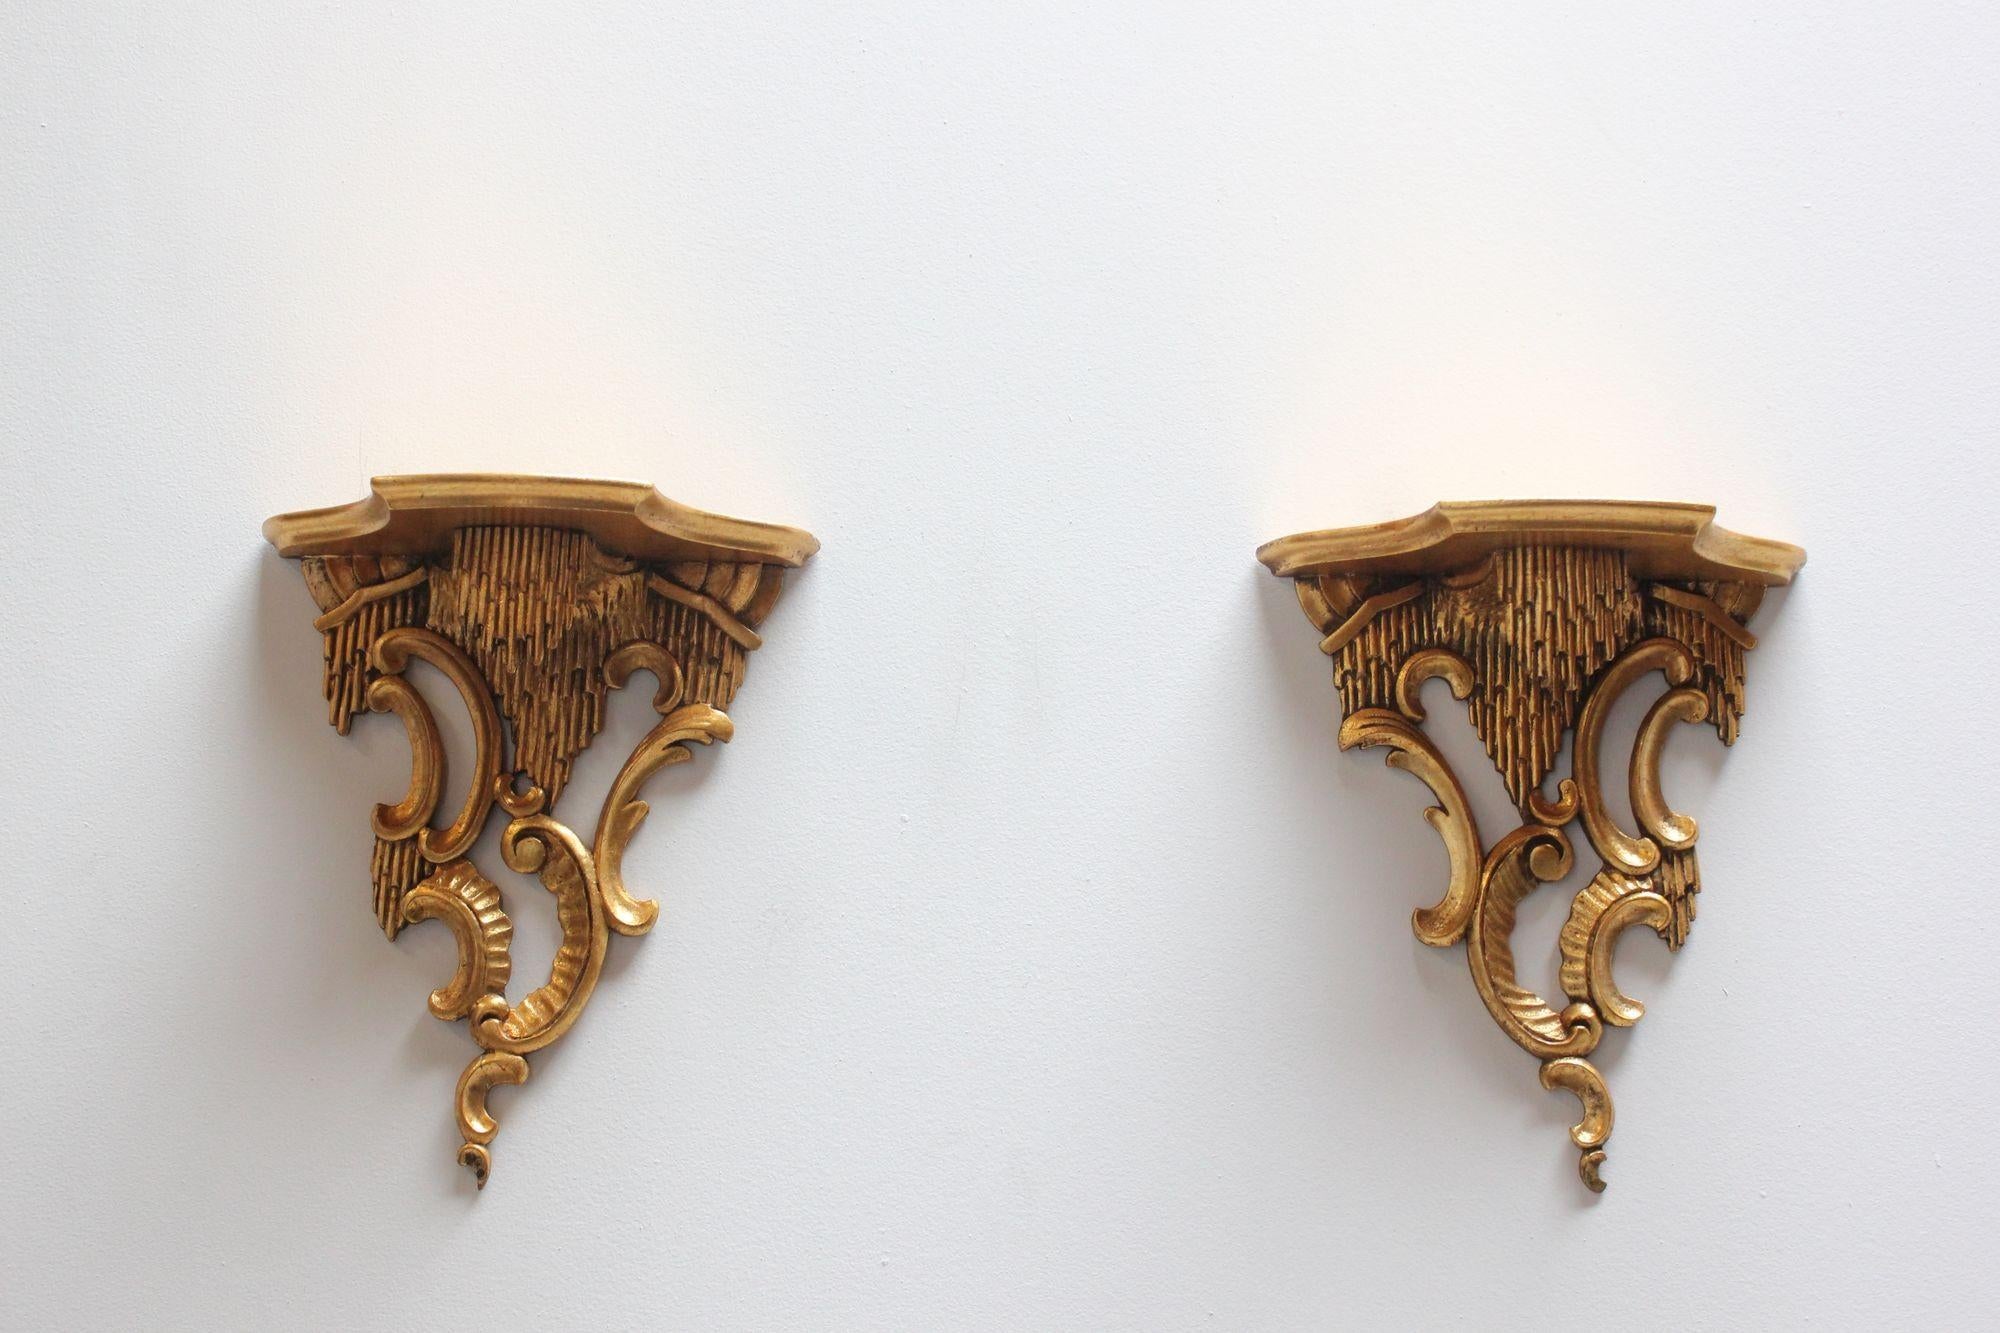 Pair of gilded Italian Rococo-style wall brackets (ca. 1950).
Deeply carved in high relief with rocaille c scroll accents and acanthus leaf decoration supporting shallow shelf surfaces. Each bracket has two hooks for hanging.
Minor gilt loss /